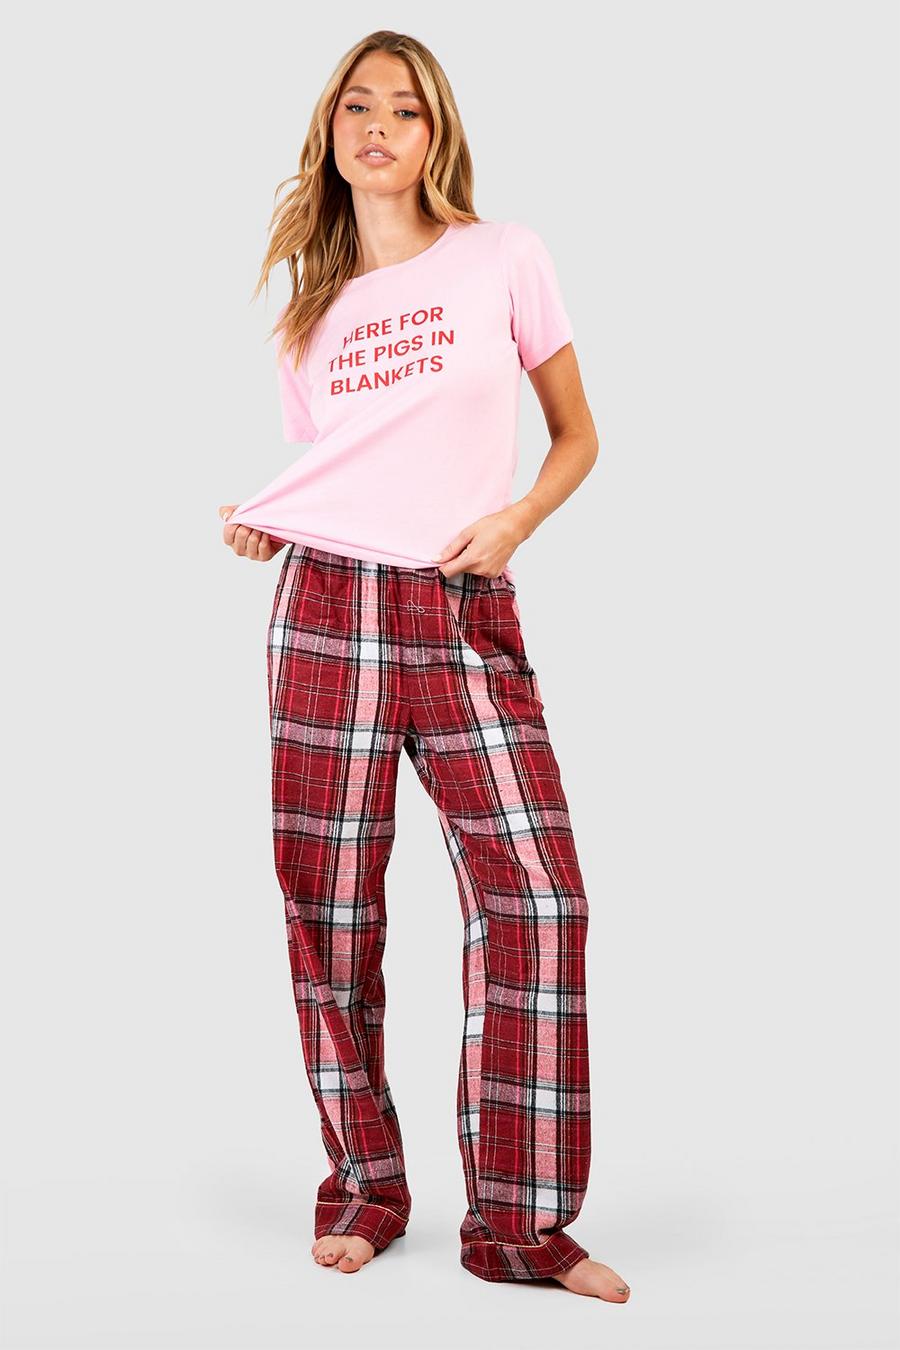 Pink Pigs In Blanket Pajama T-Shirt & Flannel Pants image number 1